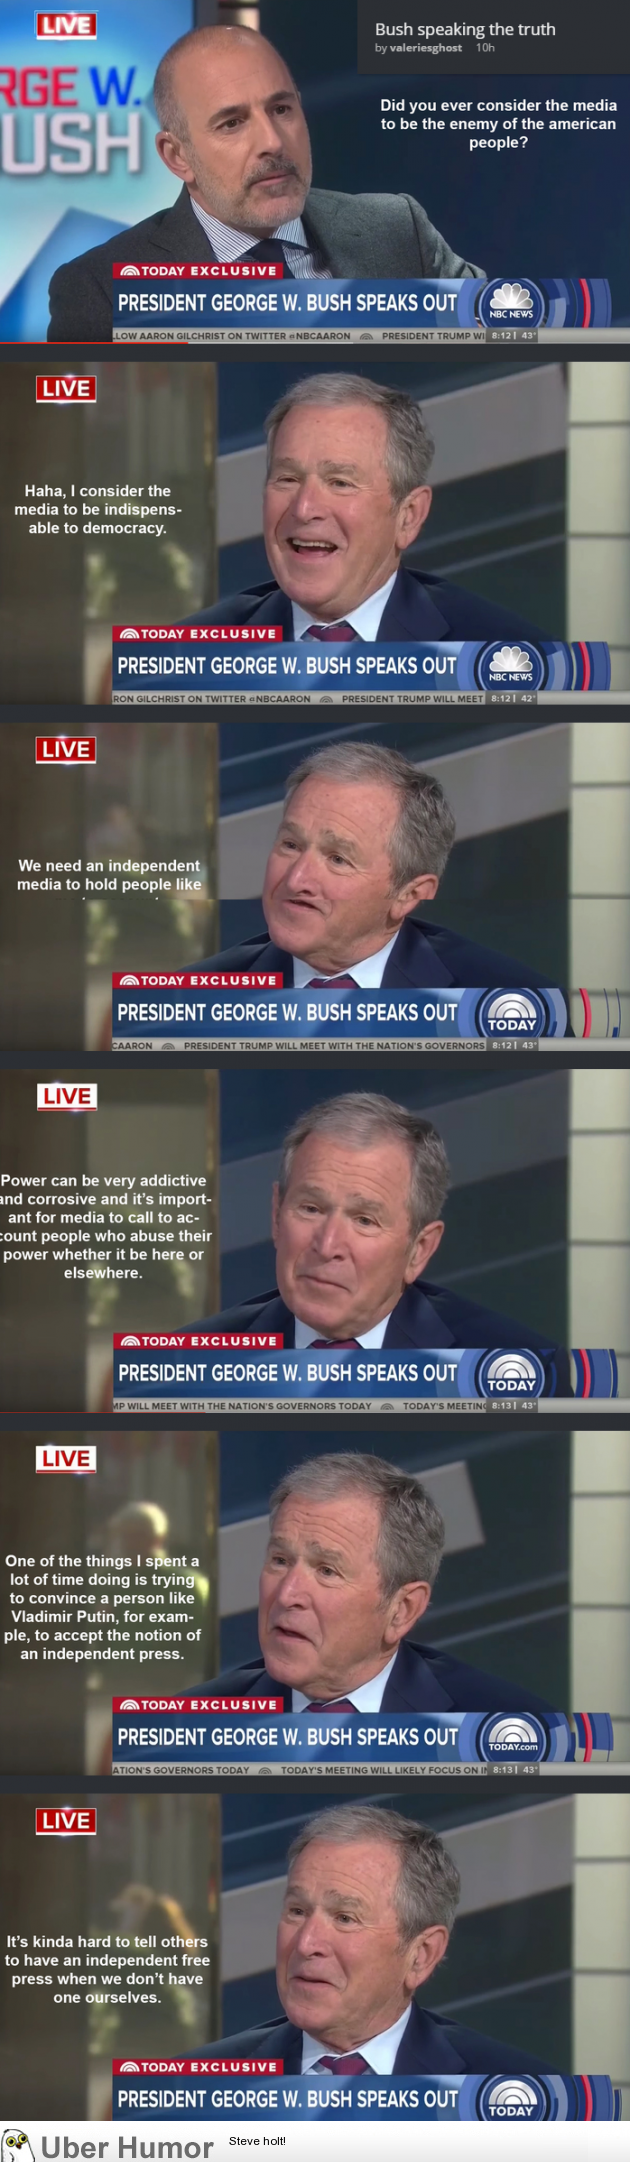 George Bush makes an appearance | Funny Pictures, Quotes, Pics, Photos,  Images. Videos of Really Very Cute animals.